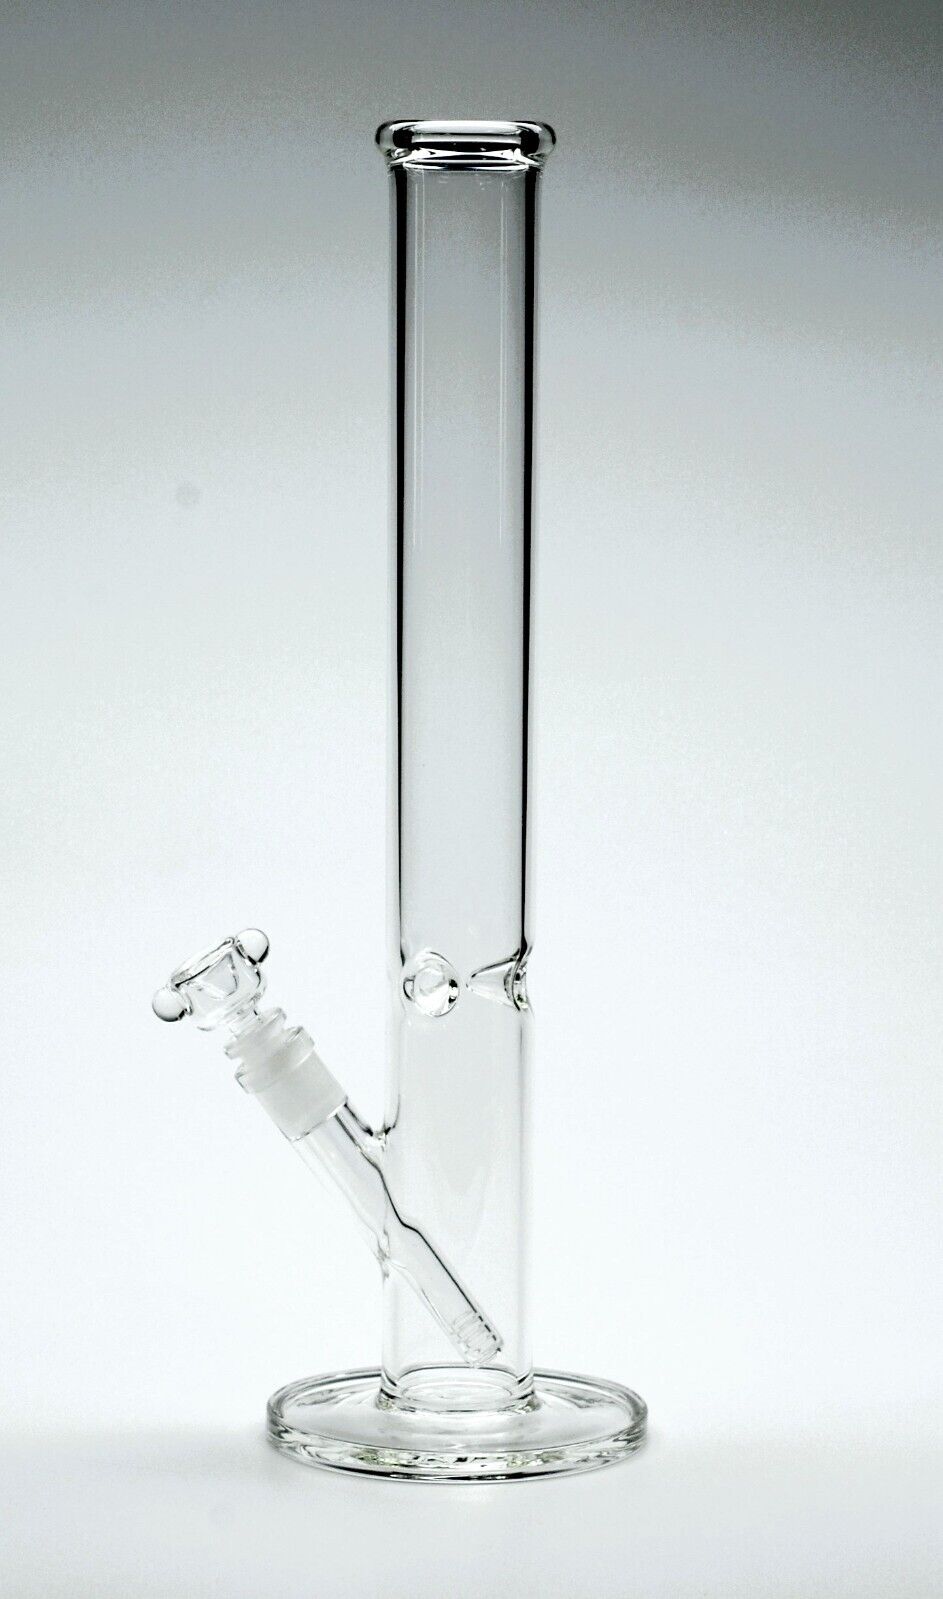 17.5  Straight 5mm Thick Glass Water Pipe Tobacco Smoking Quality Bong Hookah. Available Now for 45.99